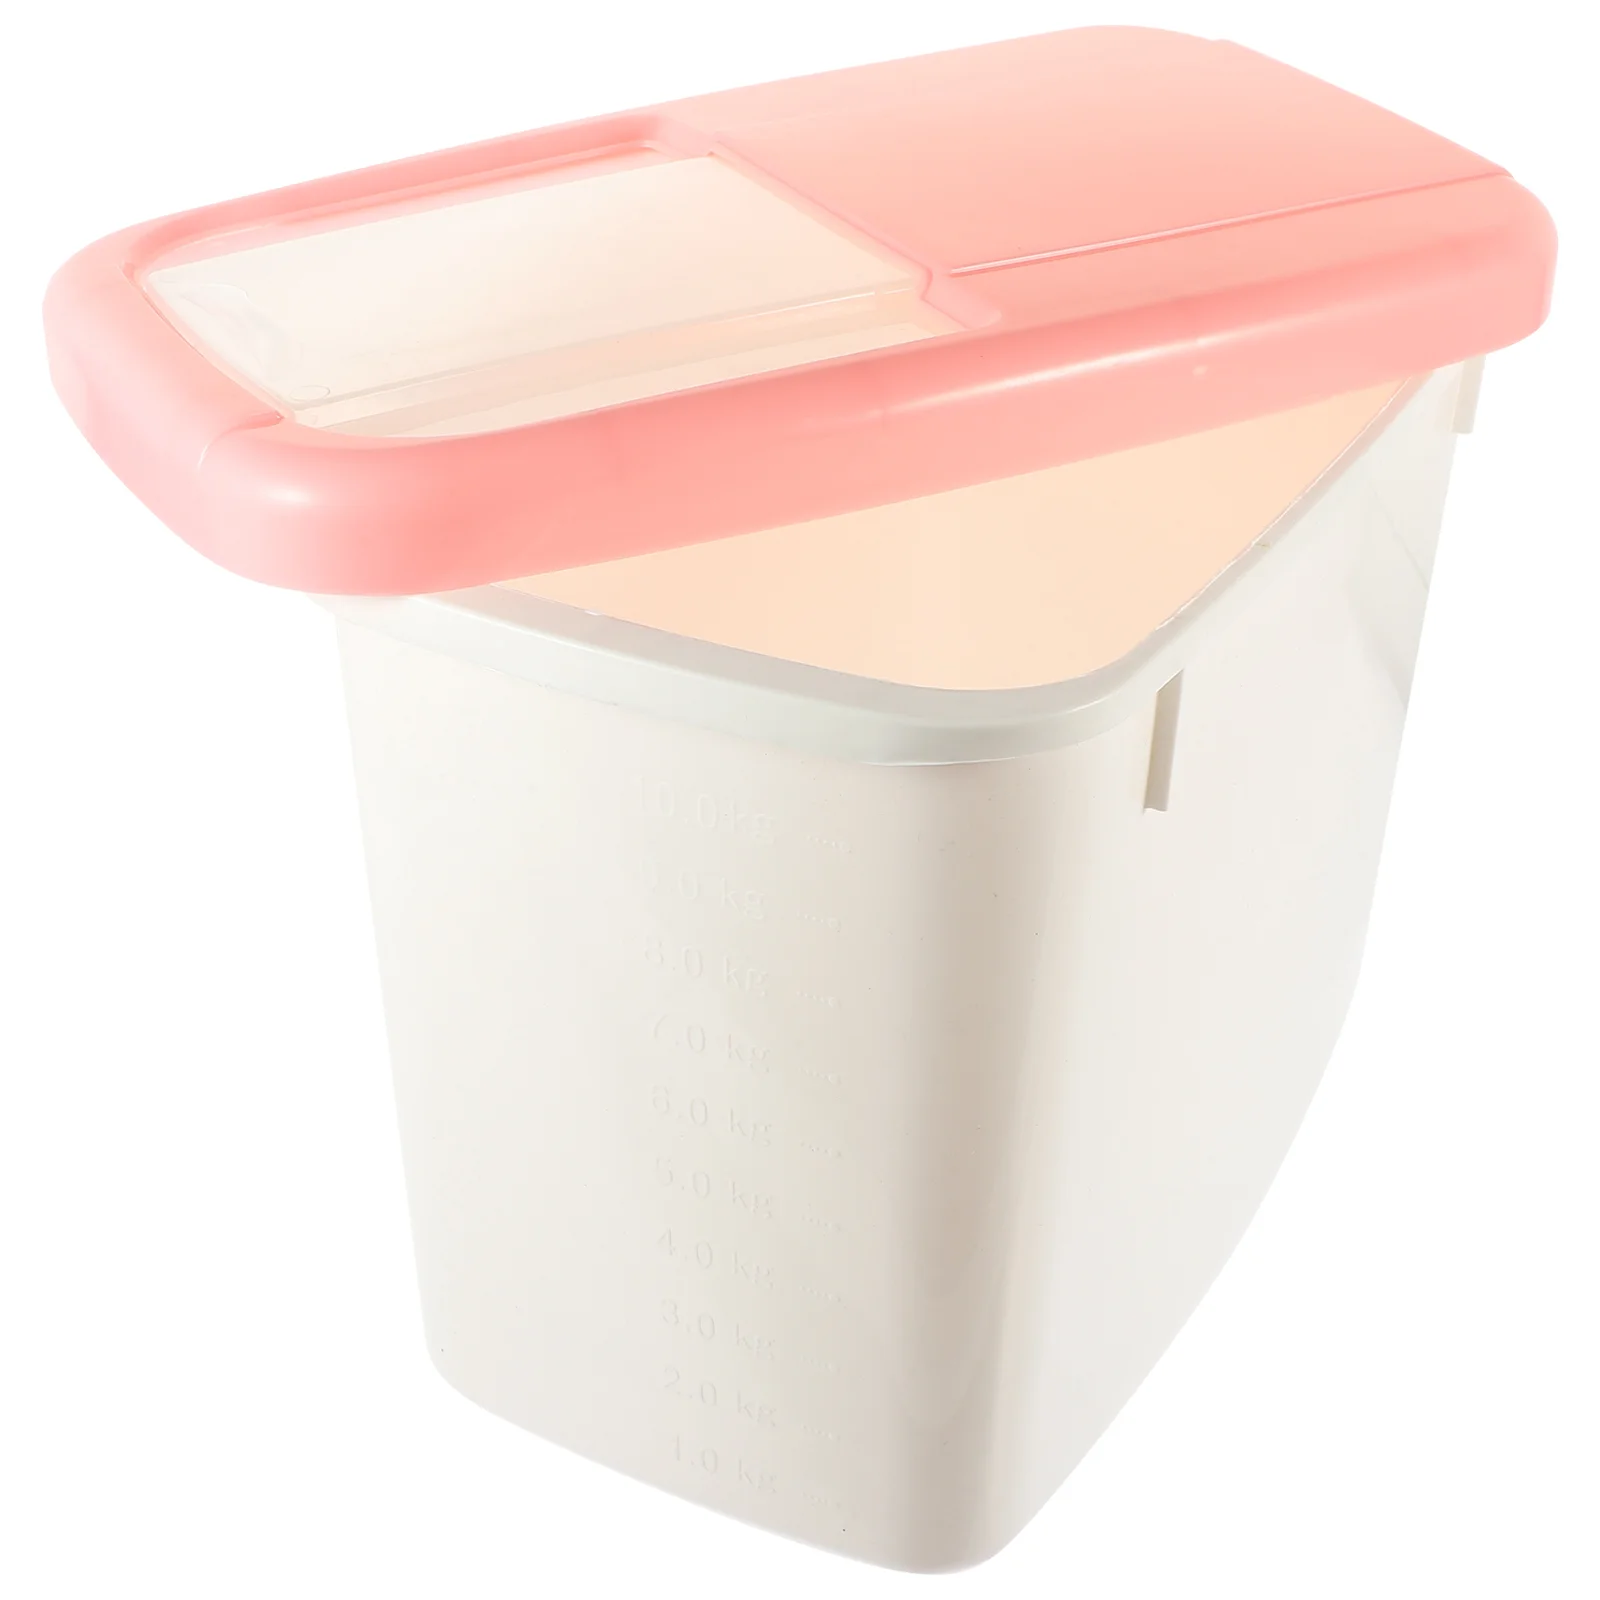 

10kg Thicken Rice Bucket Plastic Rice Container Moisture-proof Insect-proof Sealed Grain Storage Bin (Pink)